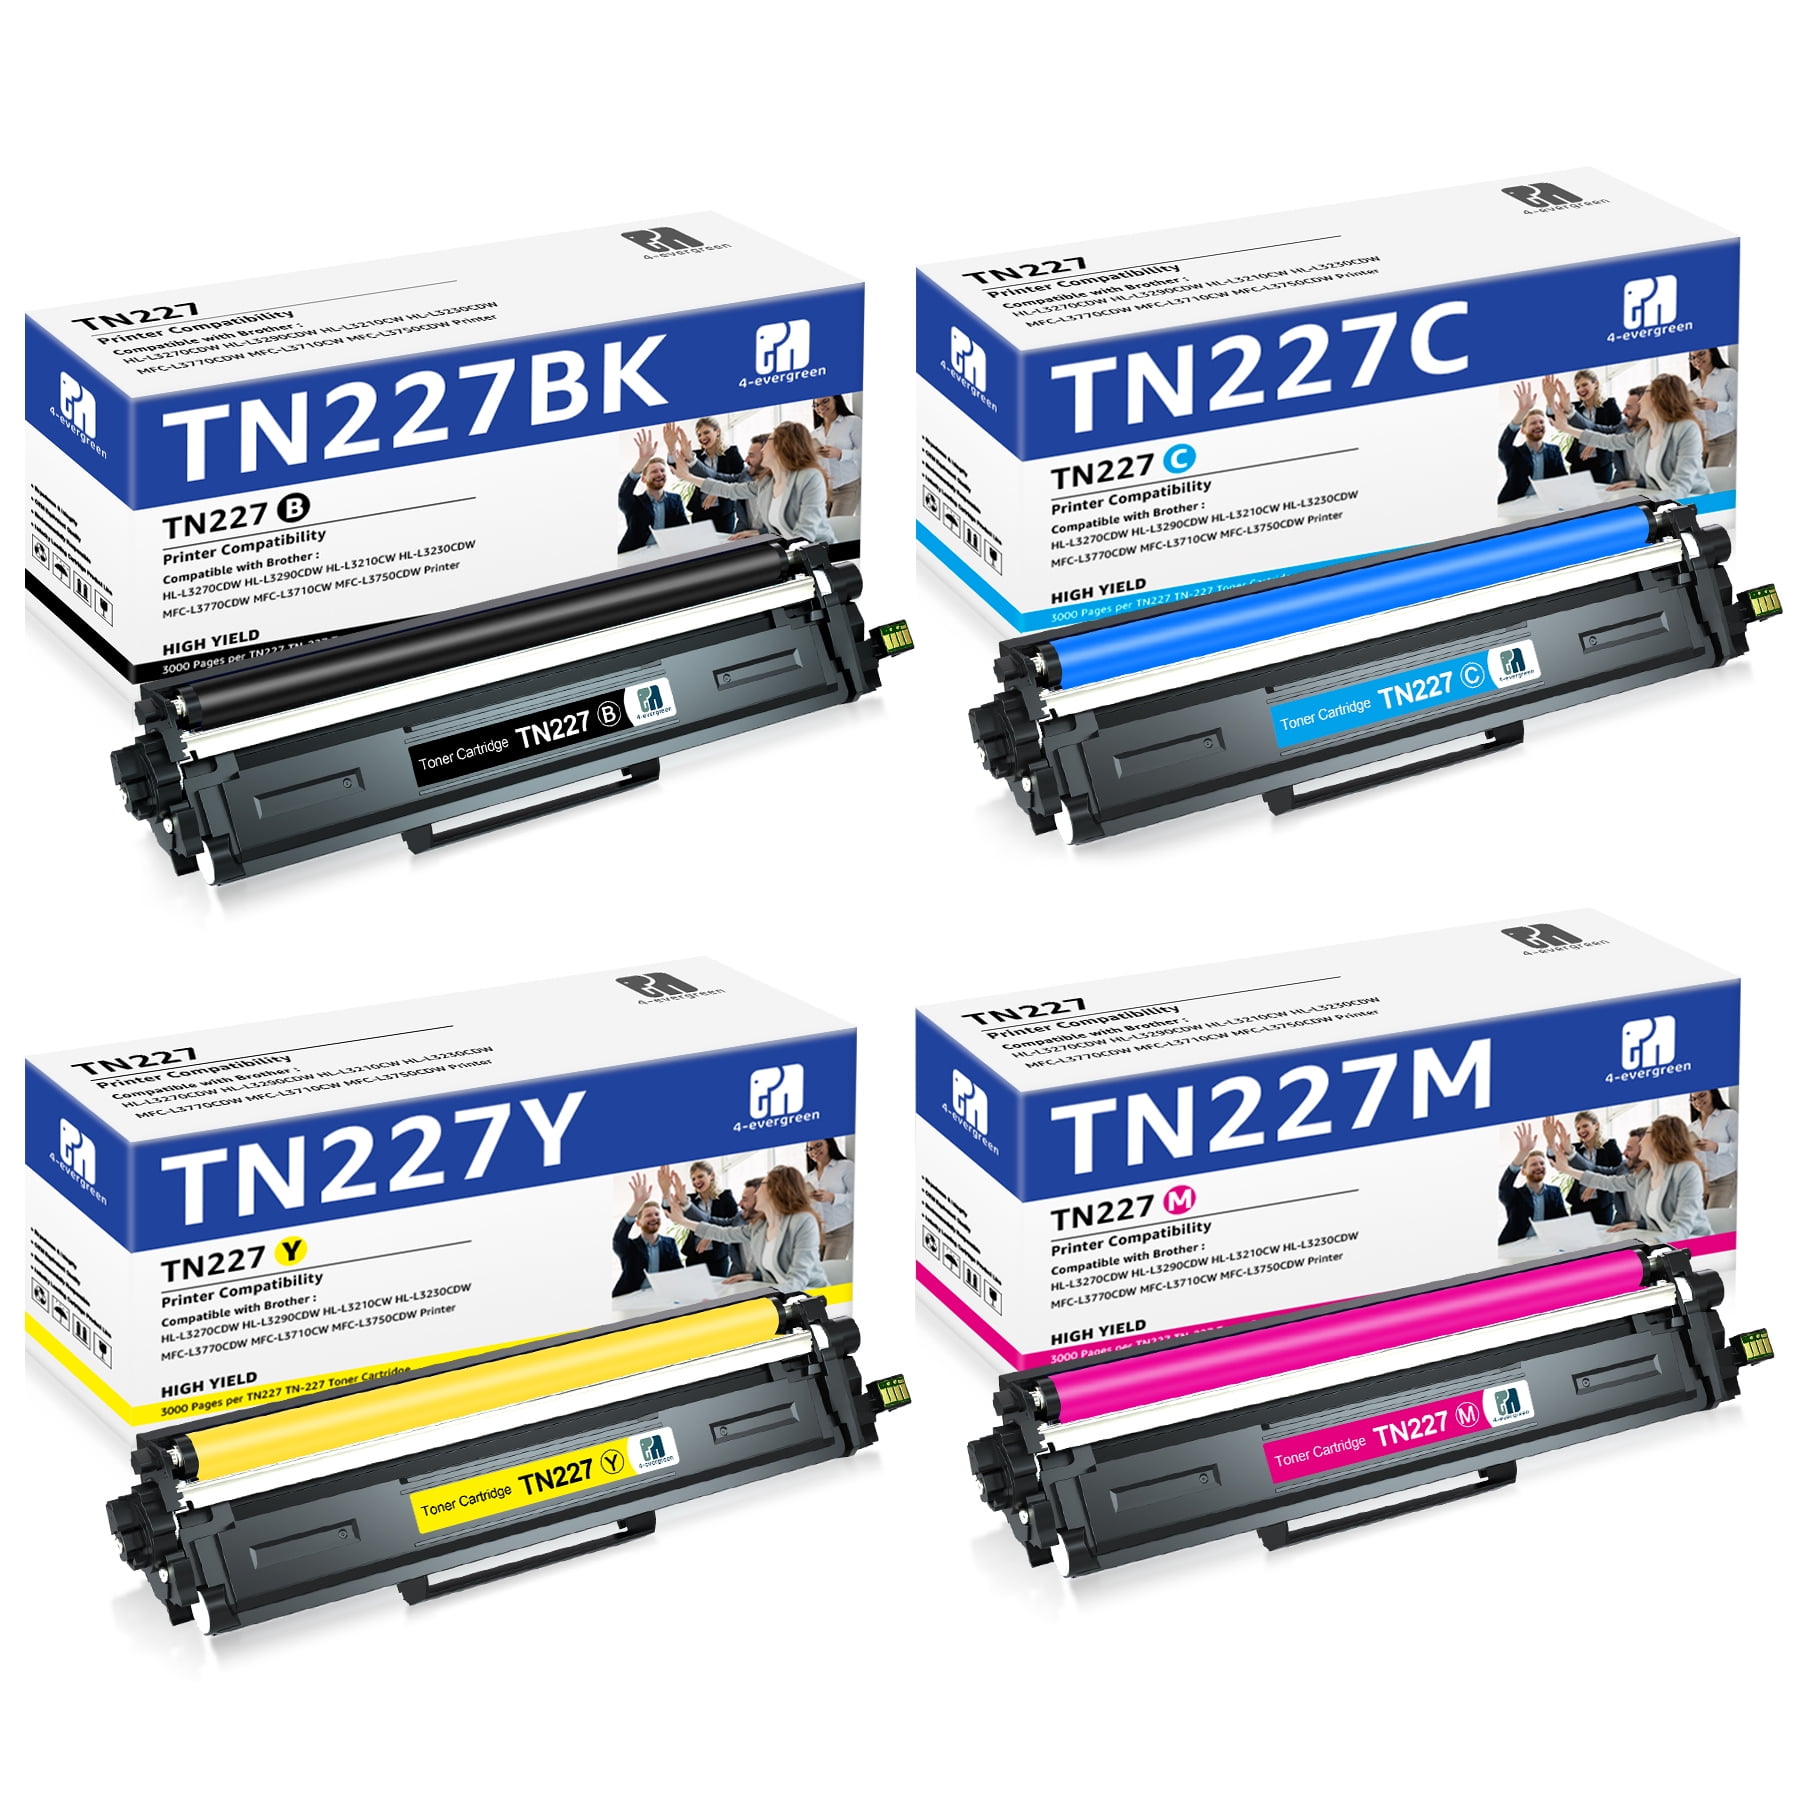 TN227 Toner Cartridge Replacement for Brother TN-227 TN223 TN 227BK/C/M/Y HL-L3270CDW  MFC-L3770CDW MFC-L3750CDW HL-L3290CDW HL-L3210CW Printer High Yield (4 Pack  TN-223BK/C/M/Y ) 